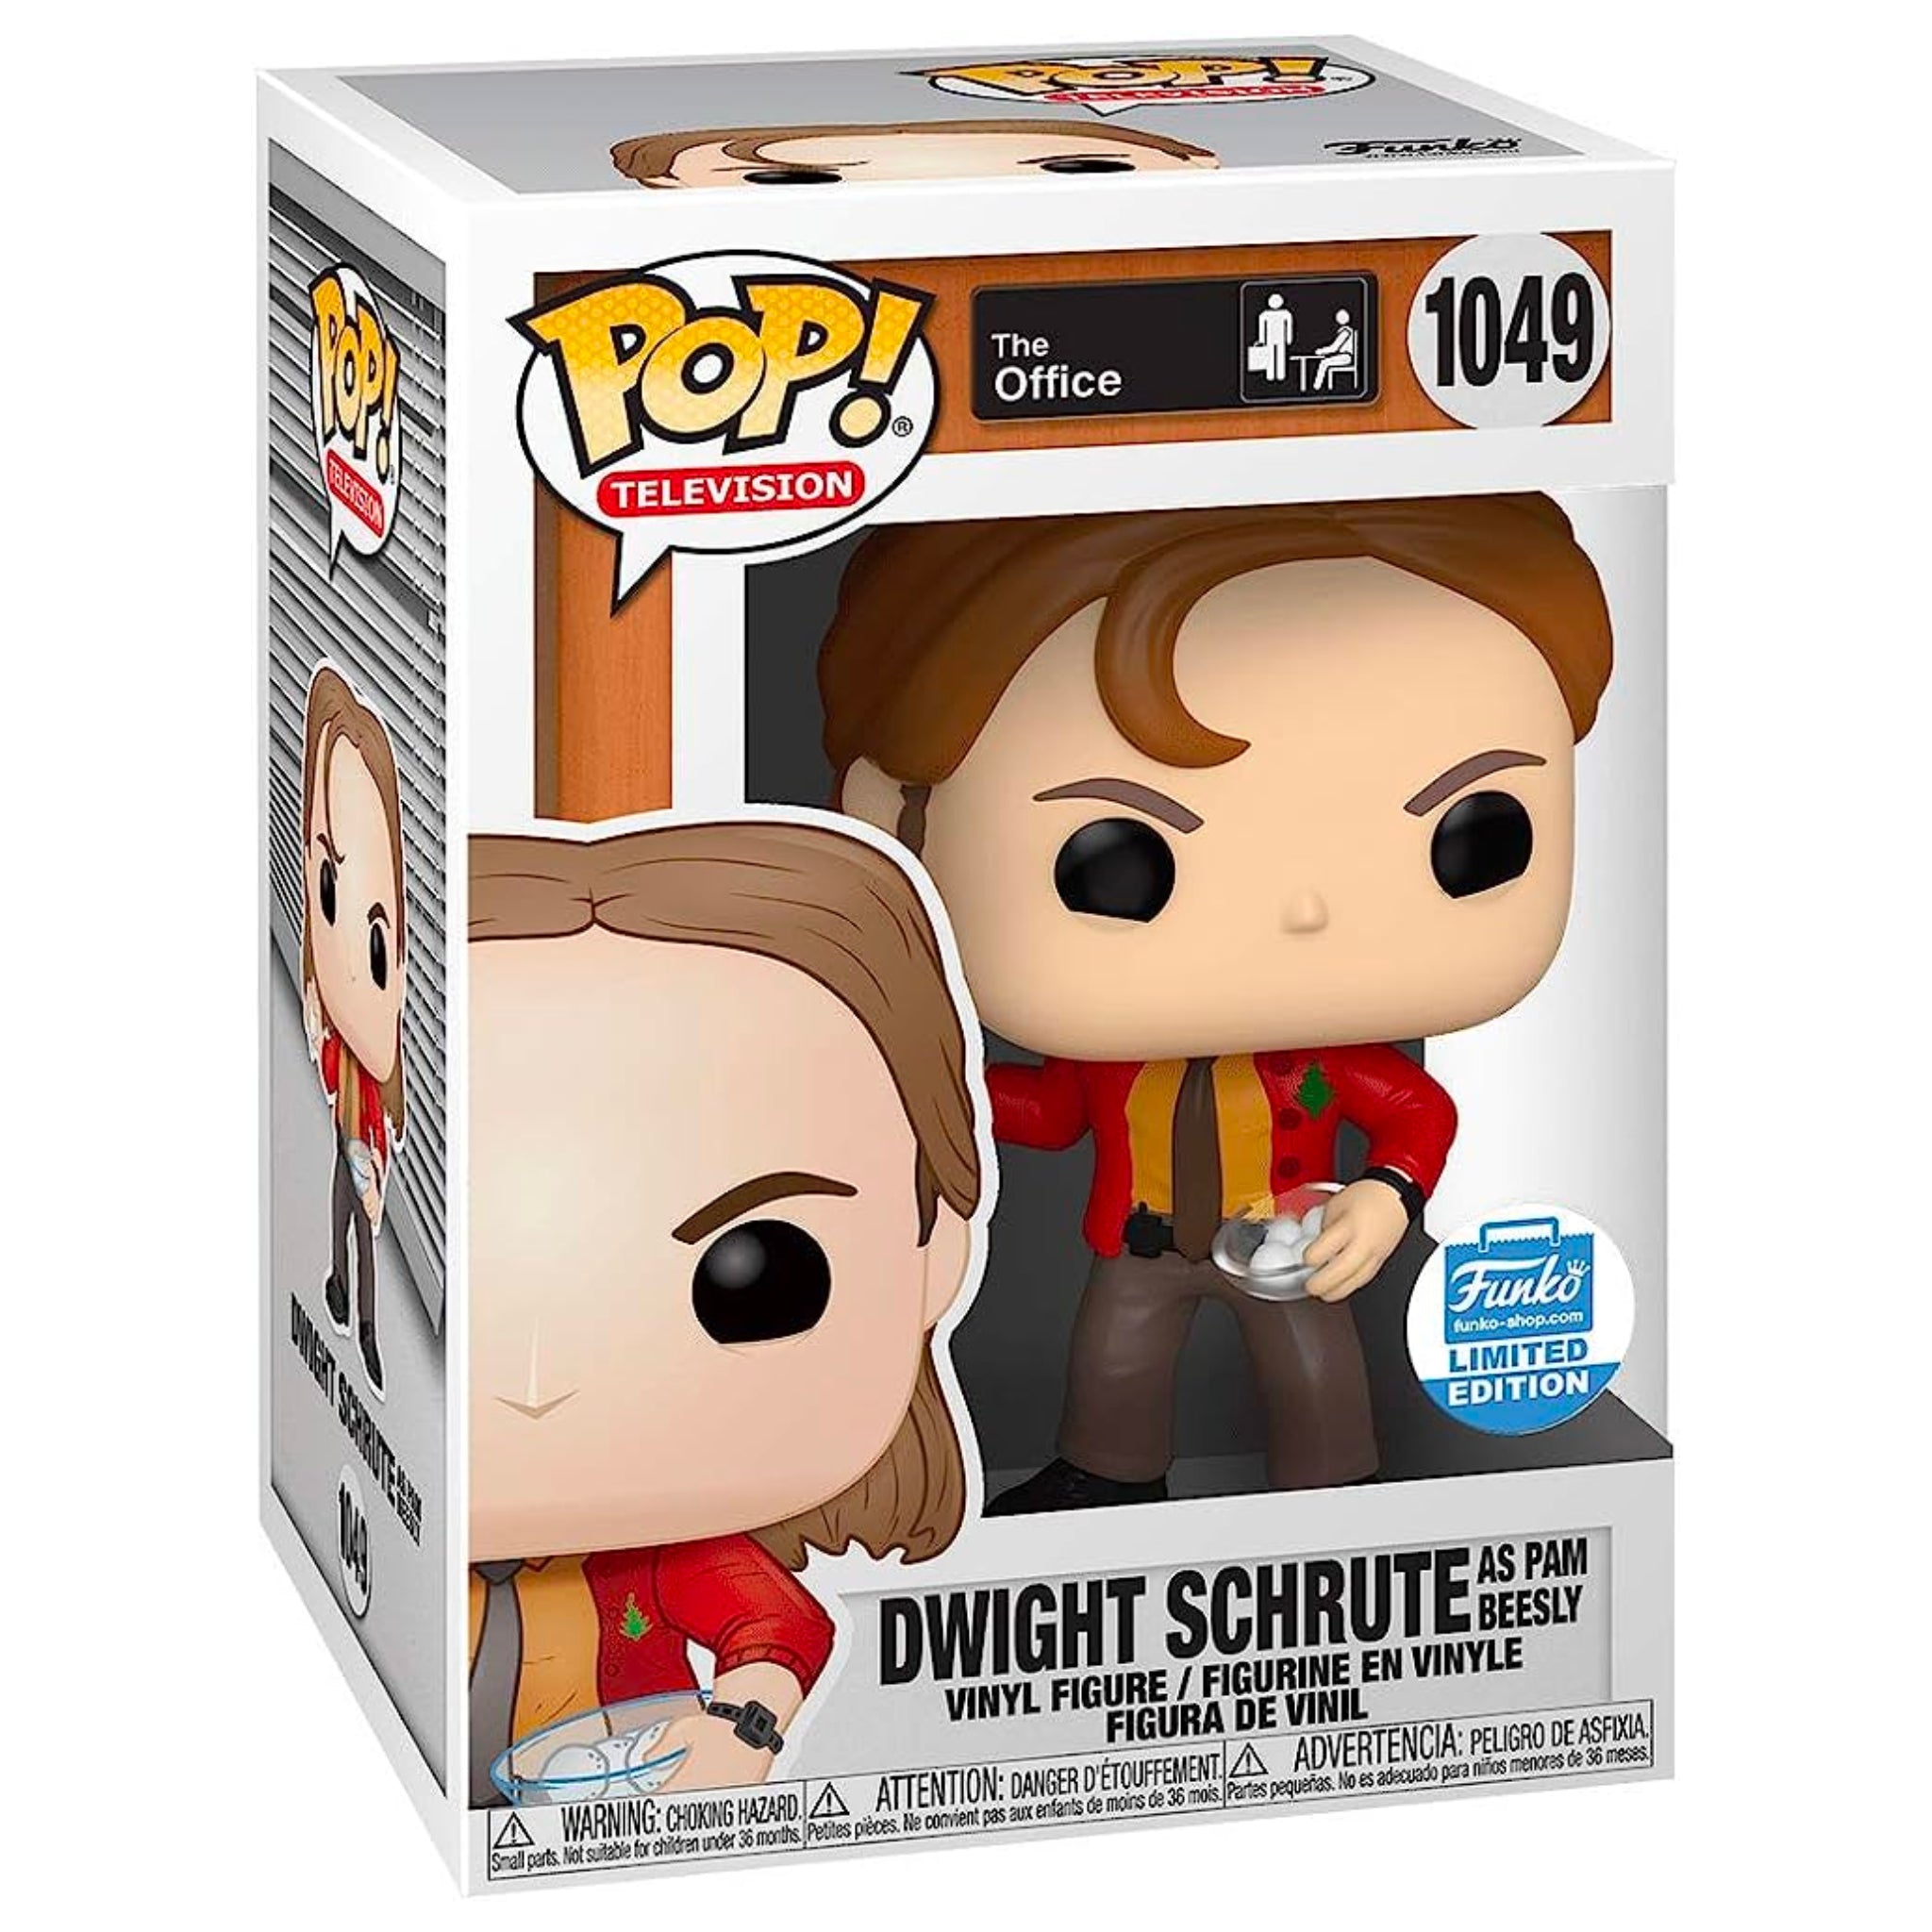 Dwight Schrute as Pam Beesly Funko Pop! FUNKO EXCLUSIVE